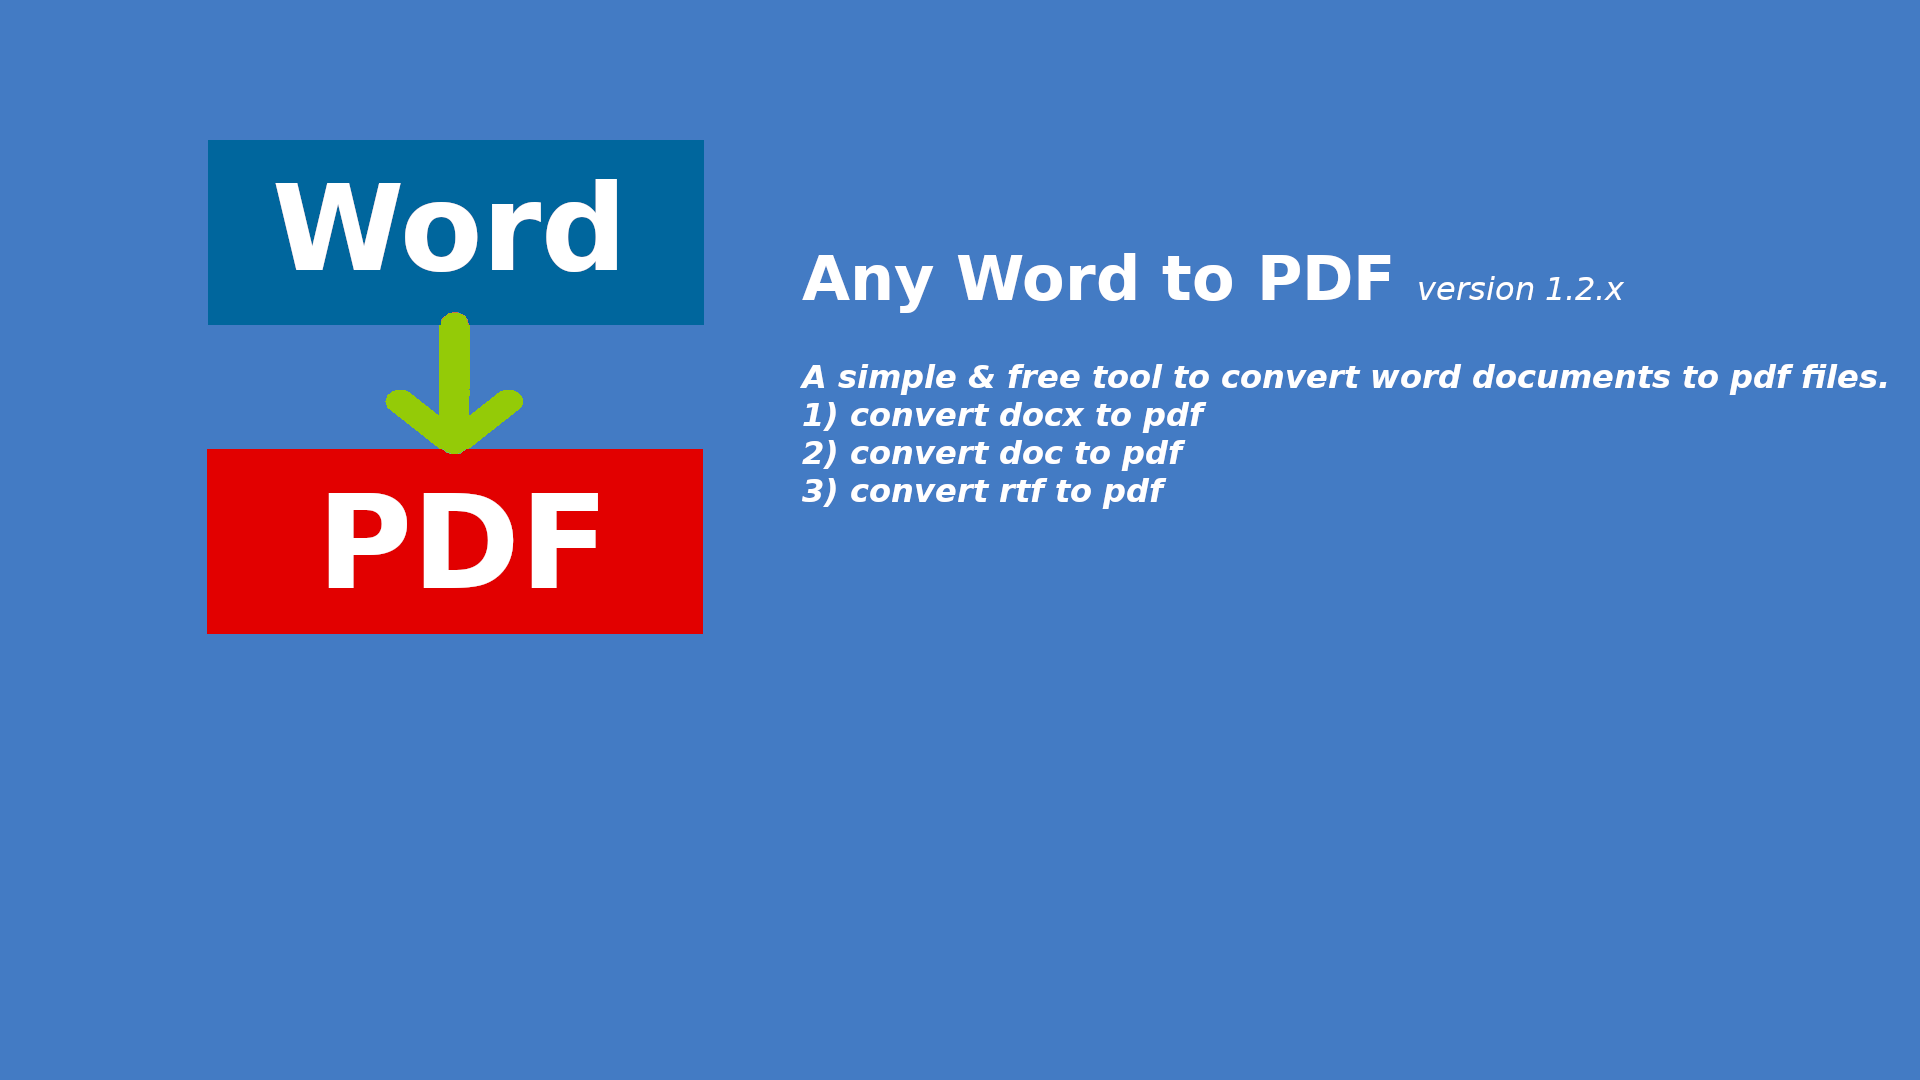 any-word-to-pdf-convert-docx-to-pdf-doc-to-pdf-for-free-al